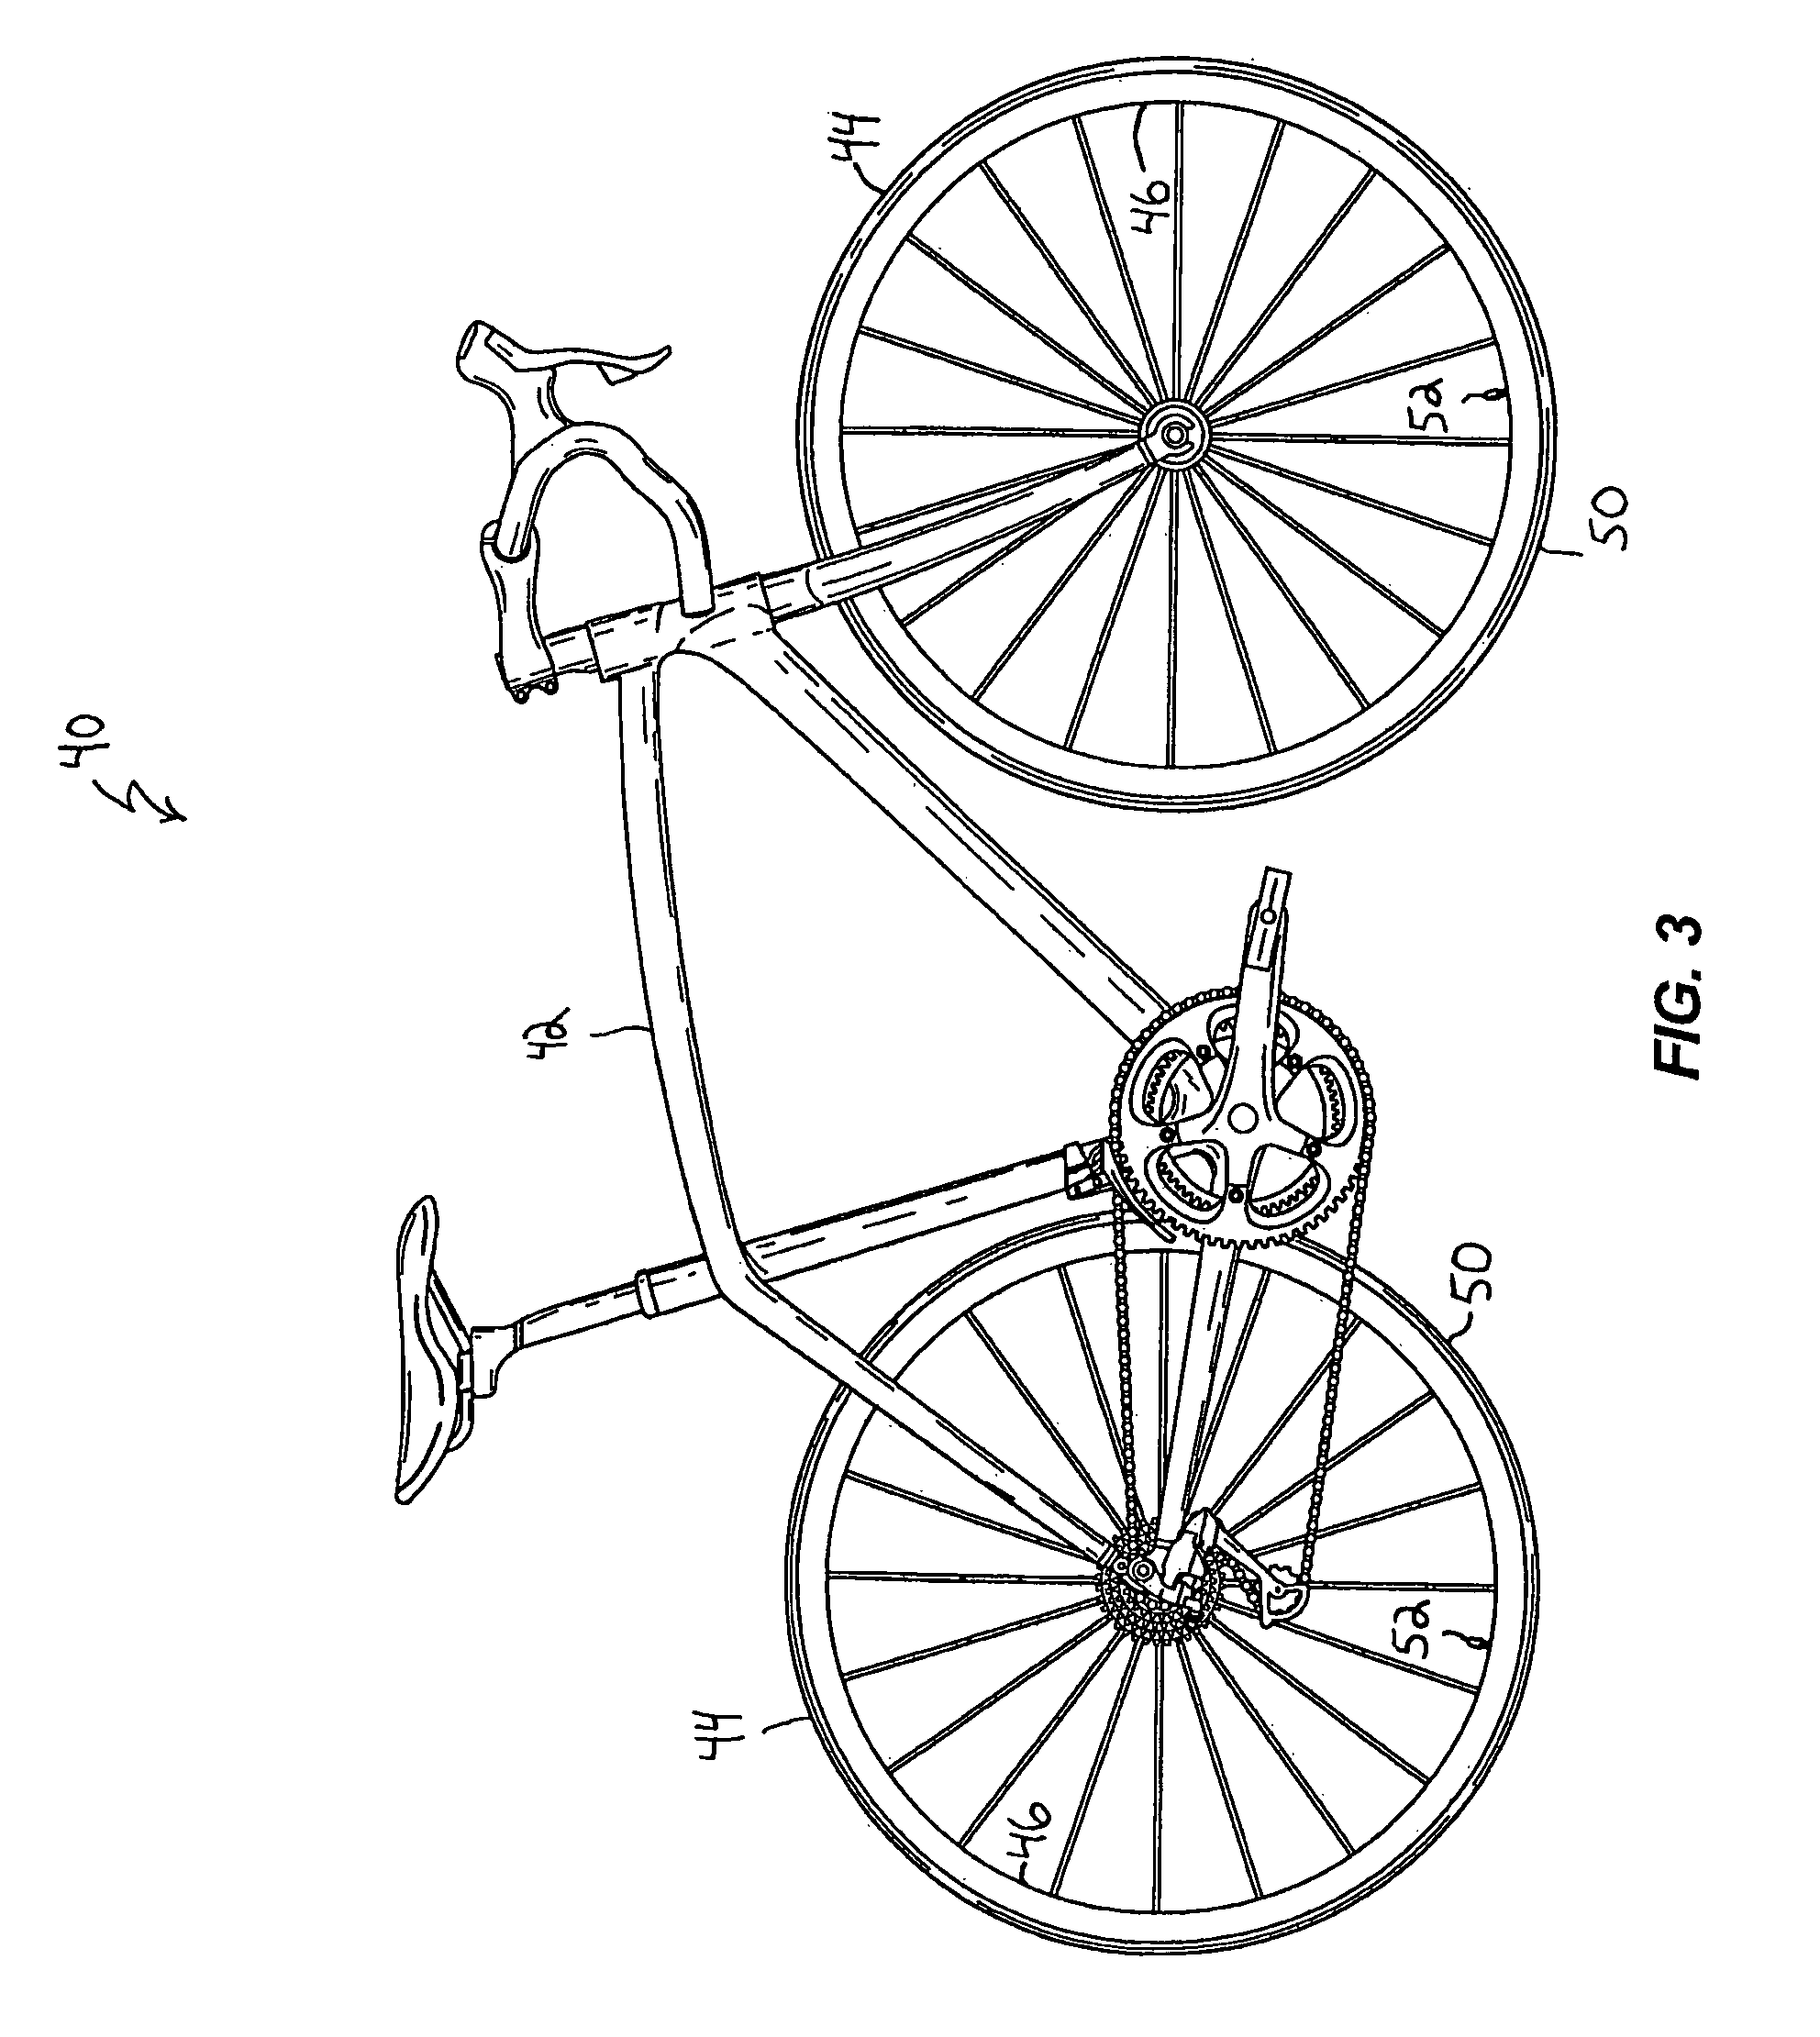 Inner-tube assembly for bicycle wheel